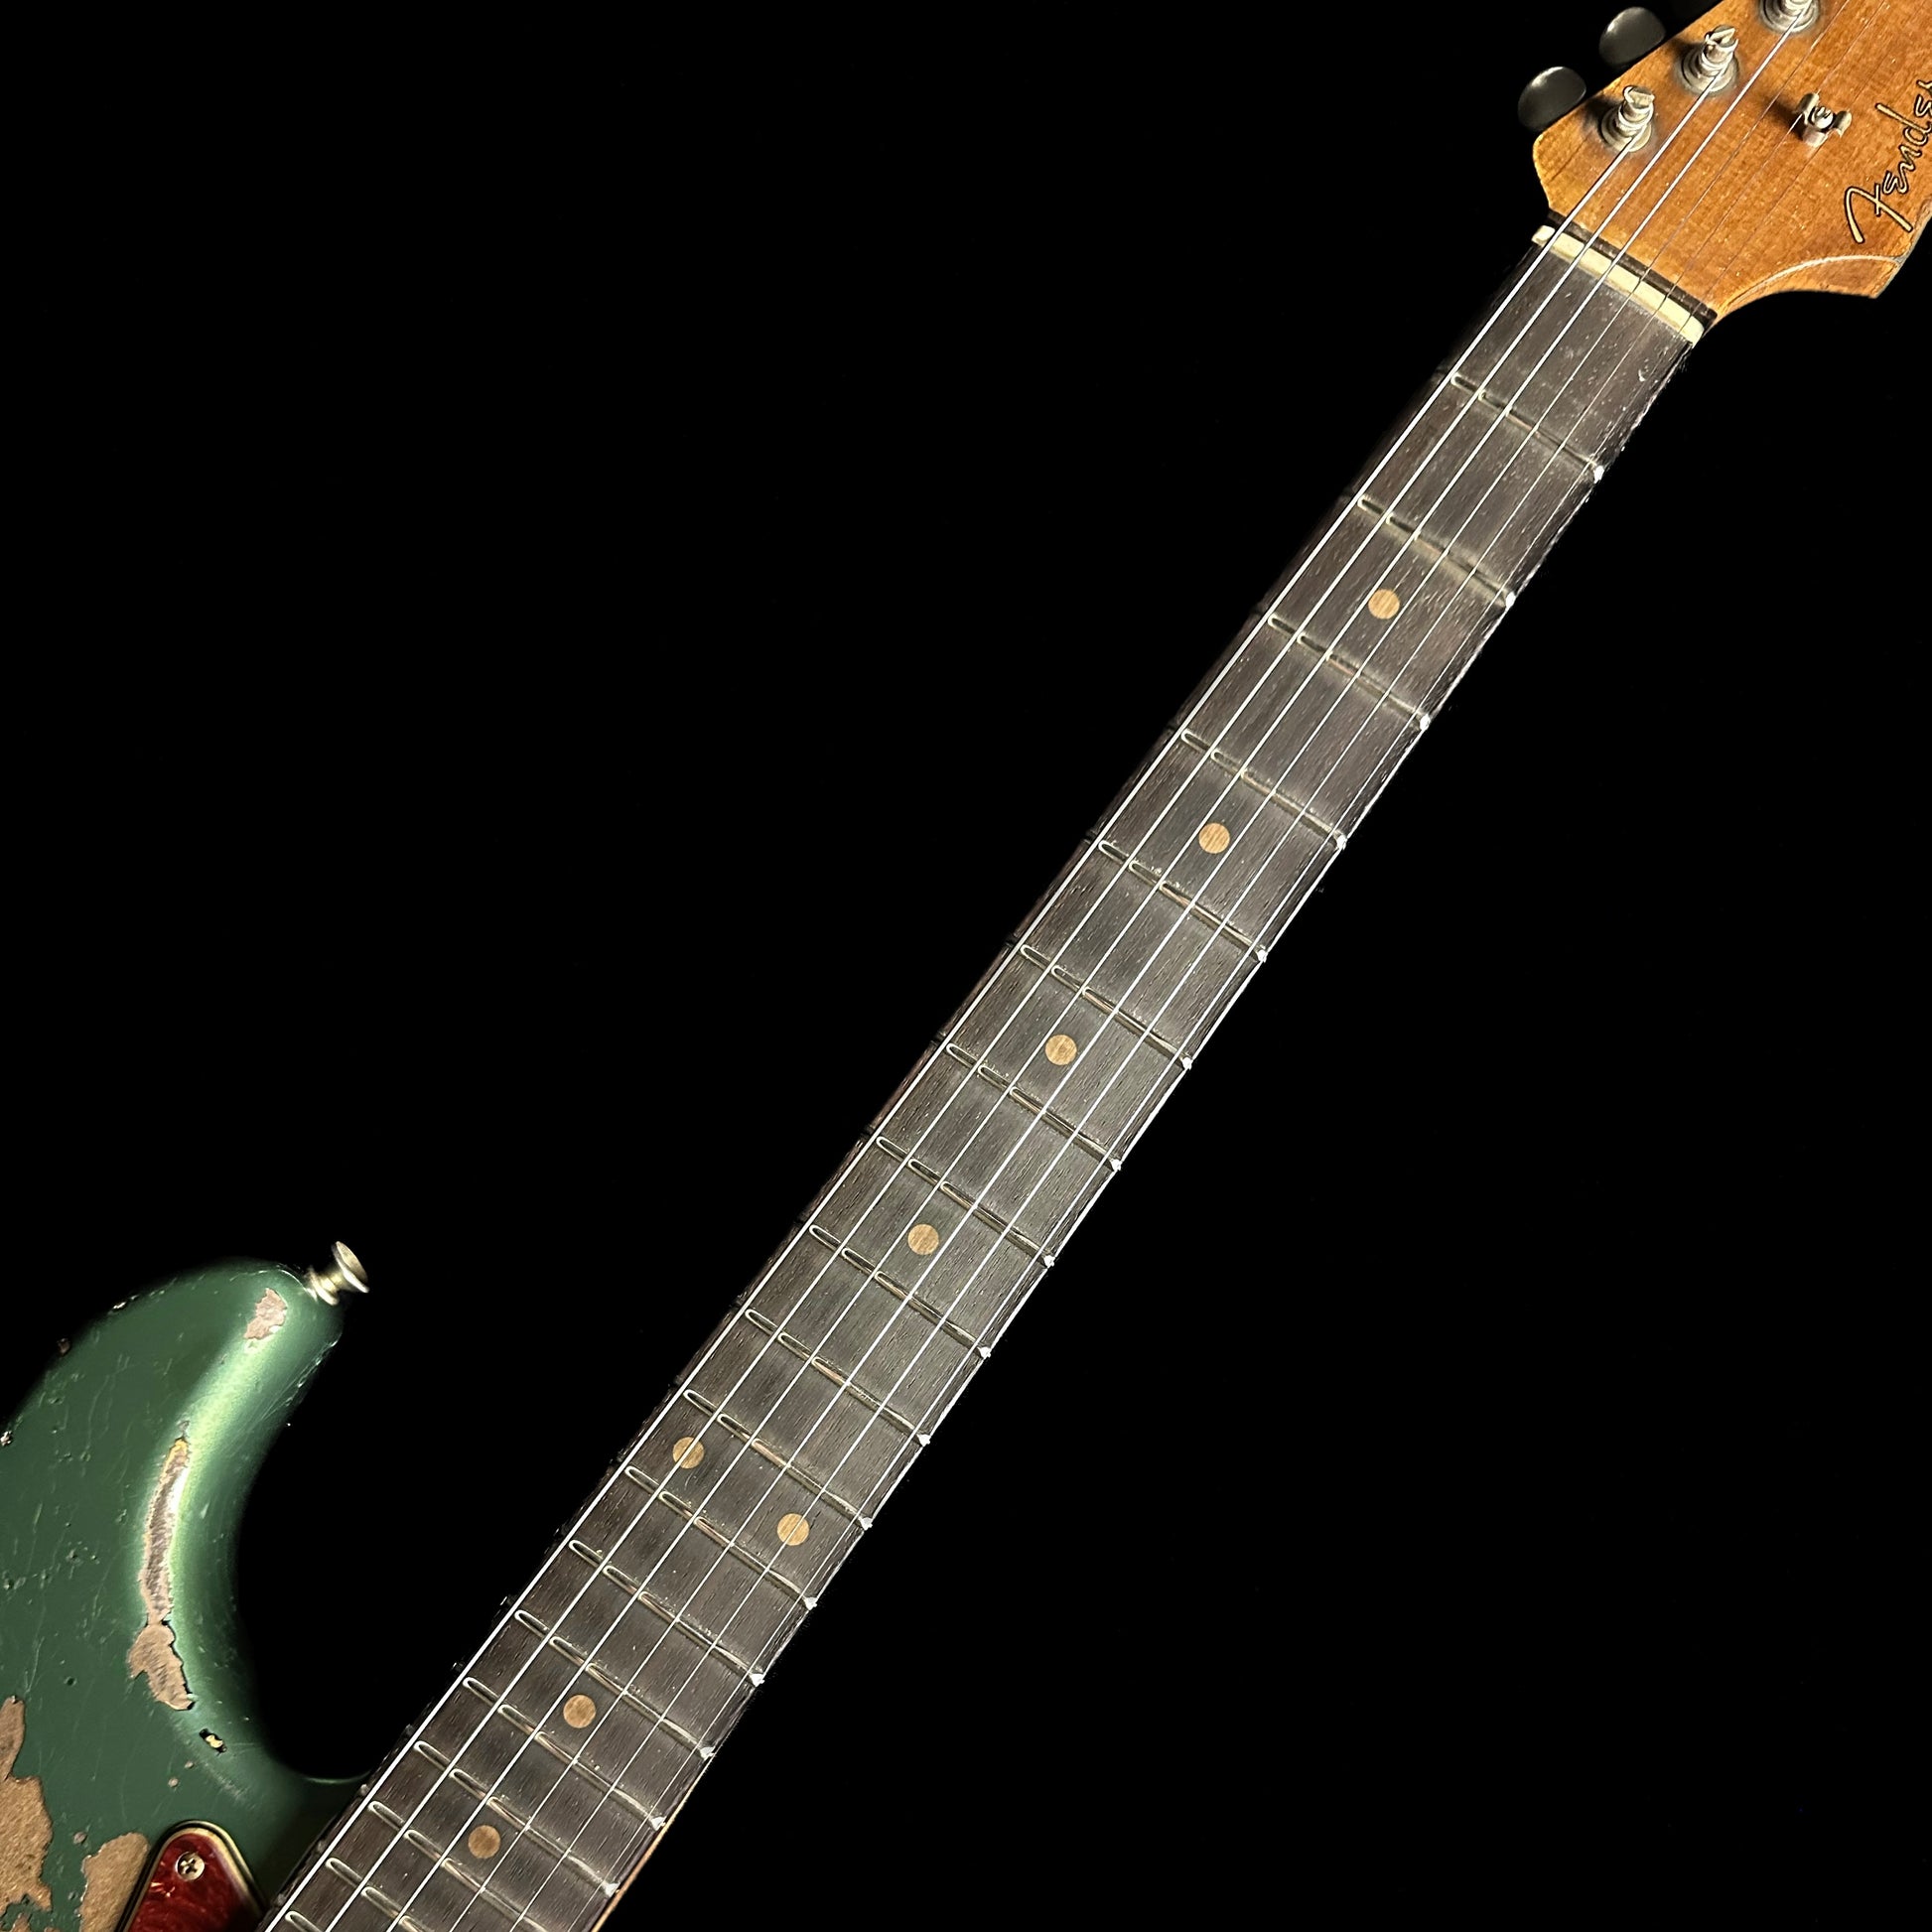 Neck of Fender Custom Shop  Limited Edition Roasted 1961 Stratocaster Super Heavy Relic Aged Sherwood Green Metallic/3TSB.